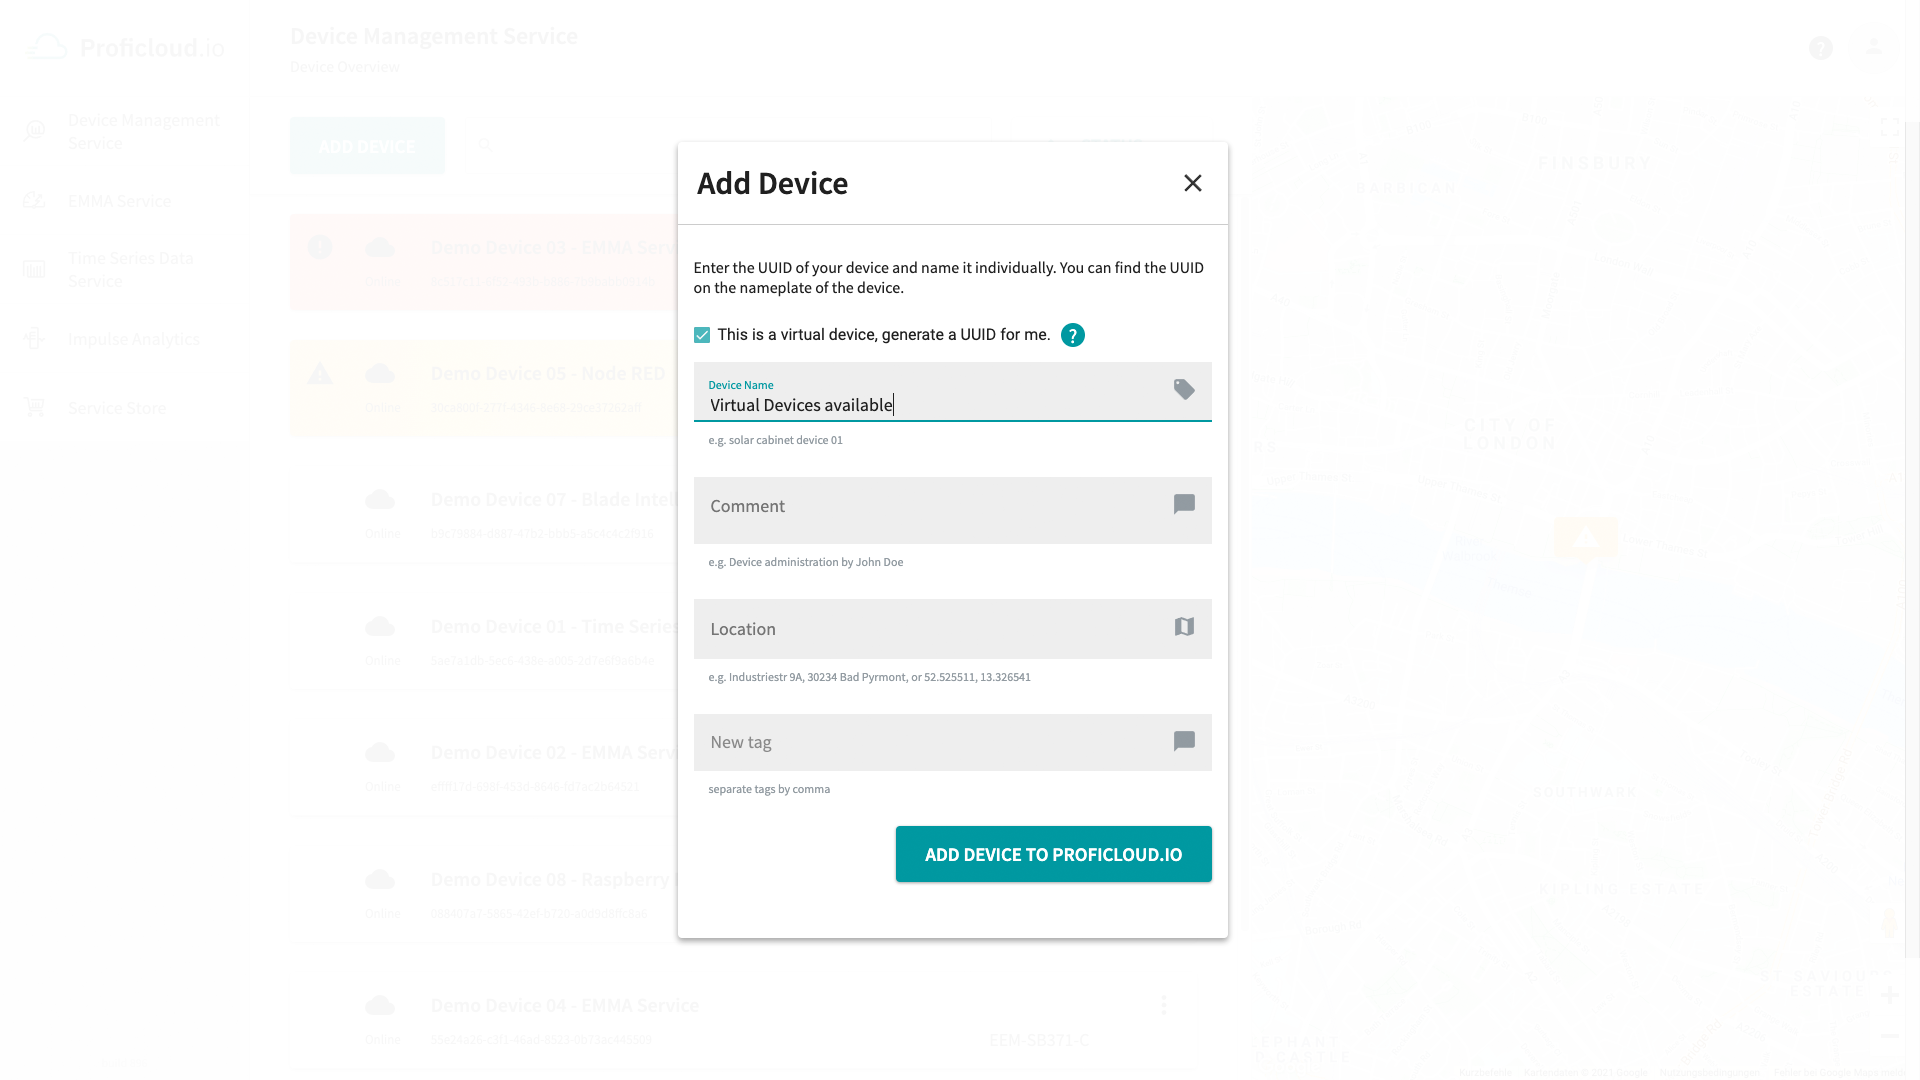 In addition to physical hardware from Phoenix Contact, virtual devices can also be added, representing third-party devices, for example, which can connect to Proficloud.io.